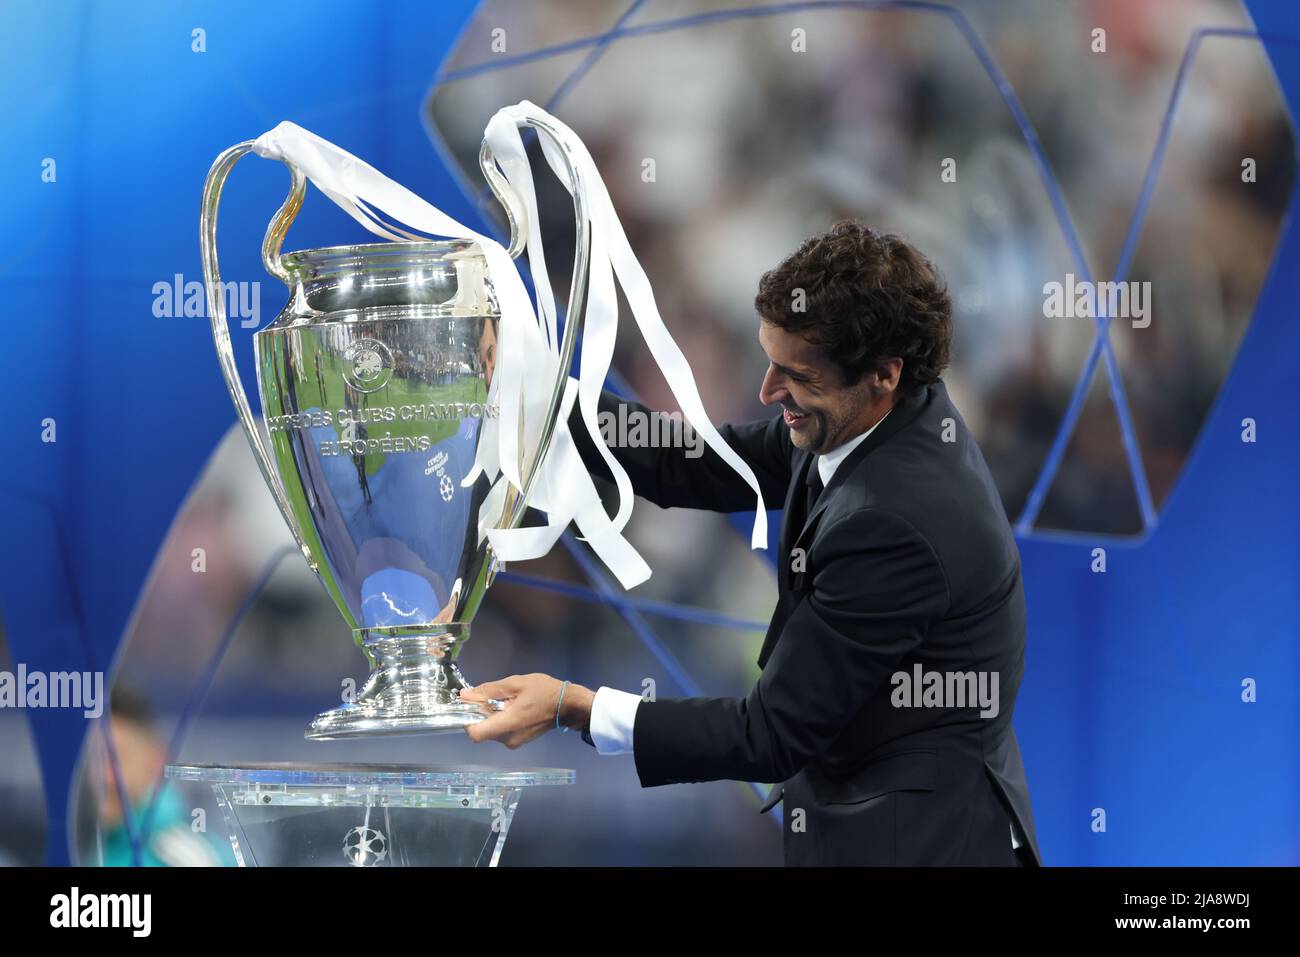 Paris, France. 28th May, 2022. Former Real Madrid player Raul Gonzalez Blanco places the trophy after the UEFA Chamiopns League final match between Real Madrid and Liverpool, in Paris, France, on May 28, 2022. Credit: Meng Dingbo/Xinhua/Alamy Live News Stock Photo